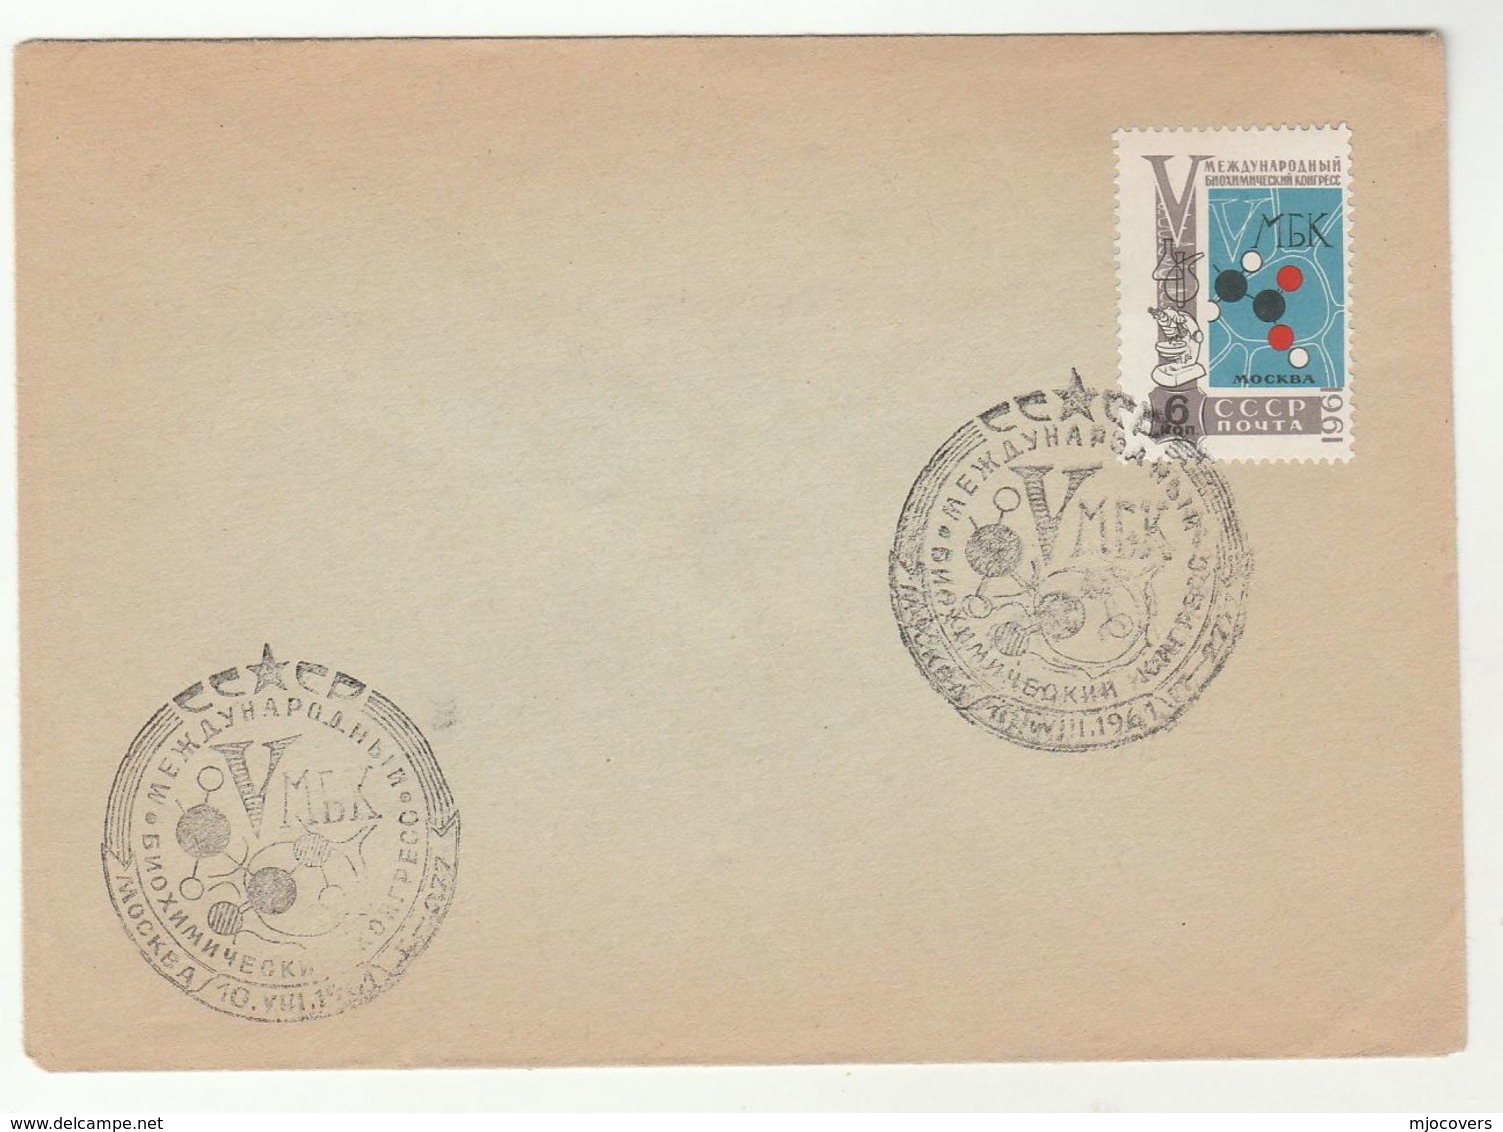 1961 COVER Russia BIOCHEMISTRY CONGRESS International EVENT Chemistry Medicine Health Stamps - Chimie